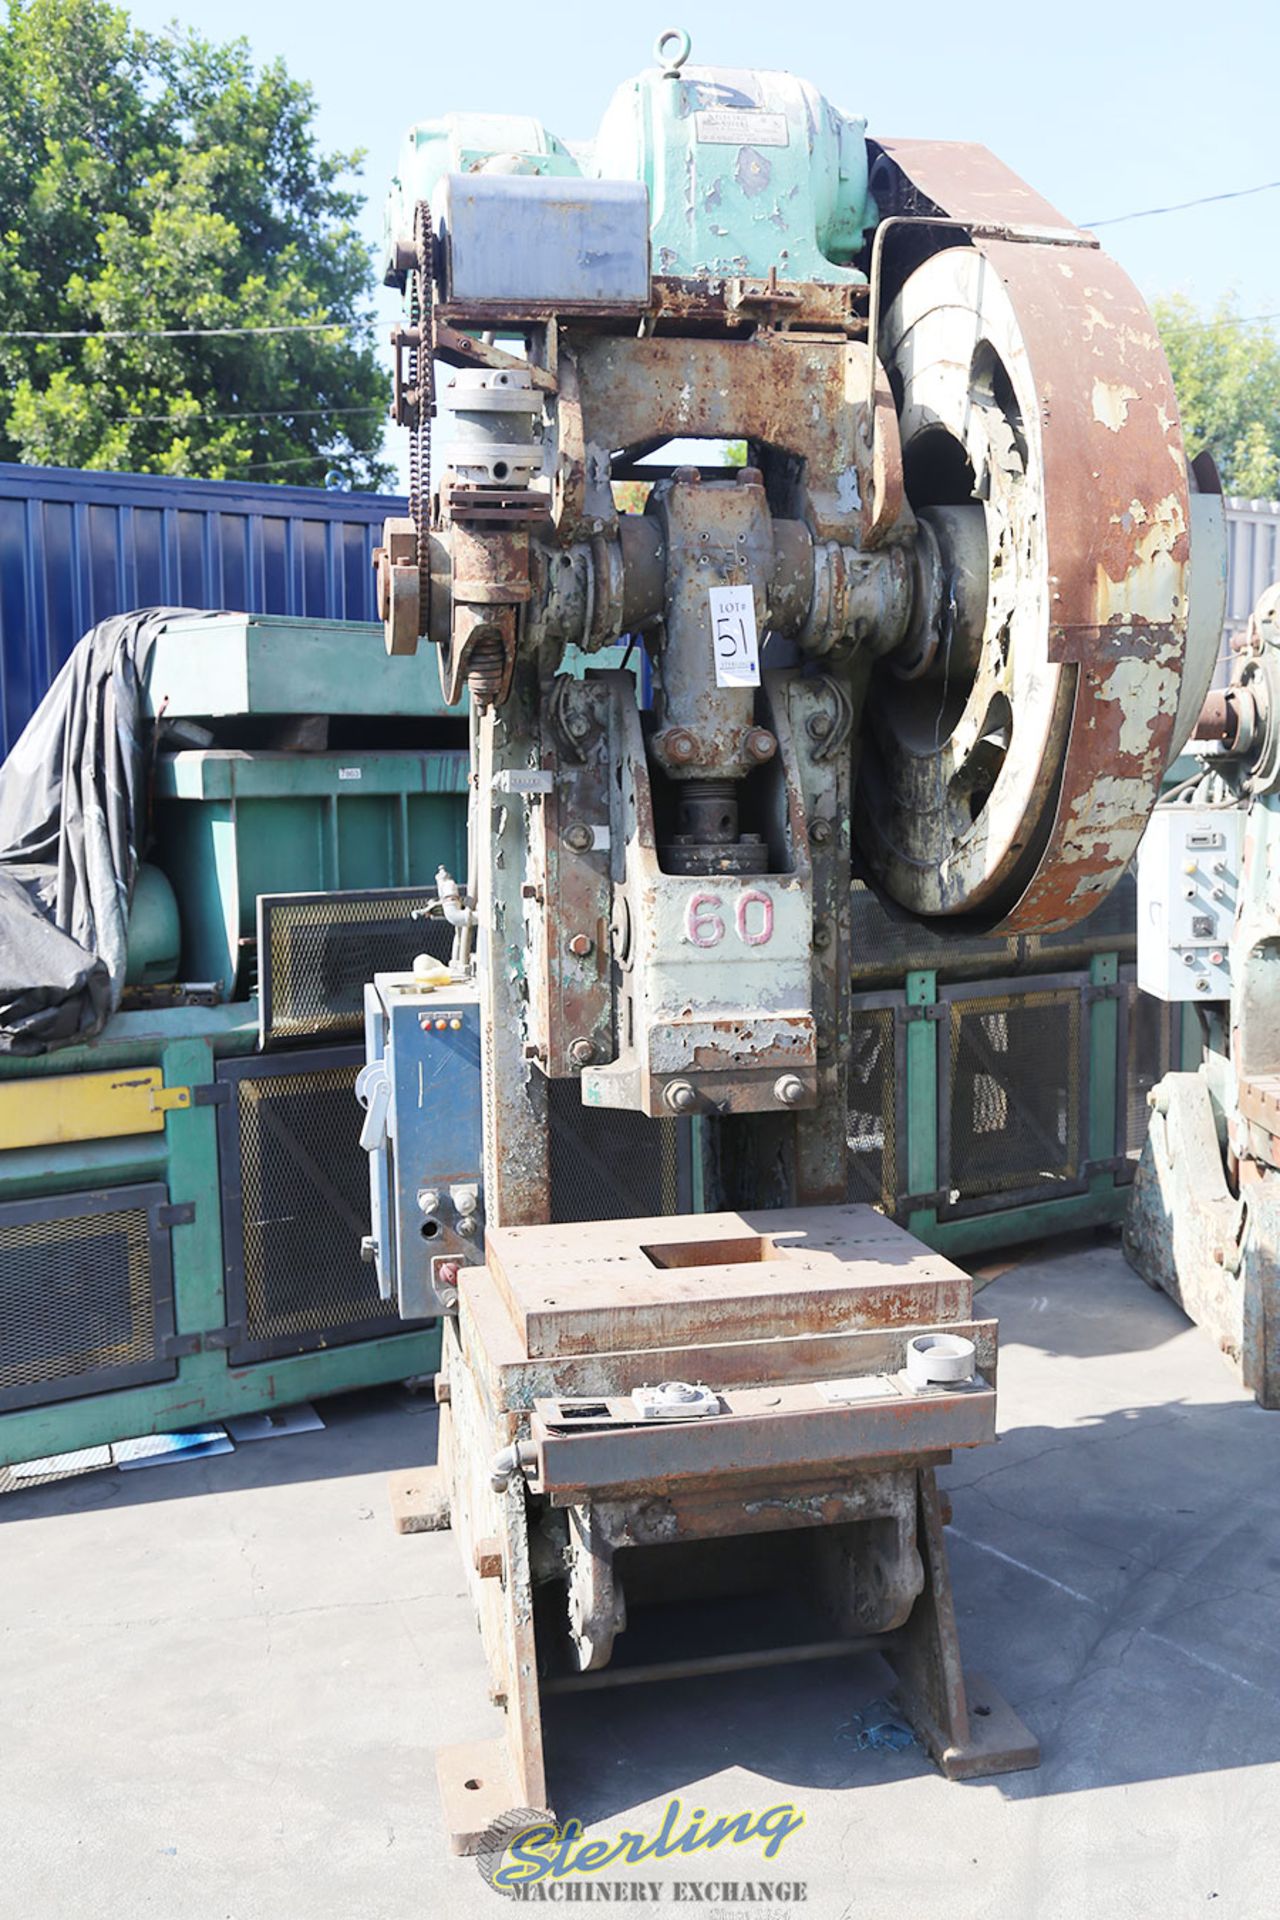 60 Ton x 4" Used Clearing Punch Press, Mdl. #6, Vari-Speed